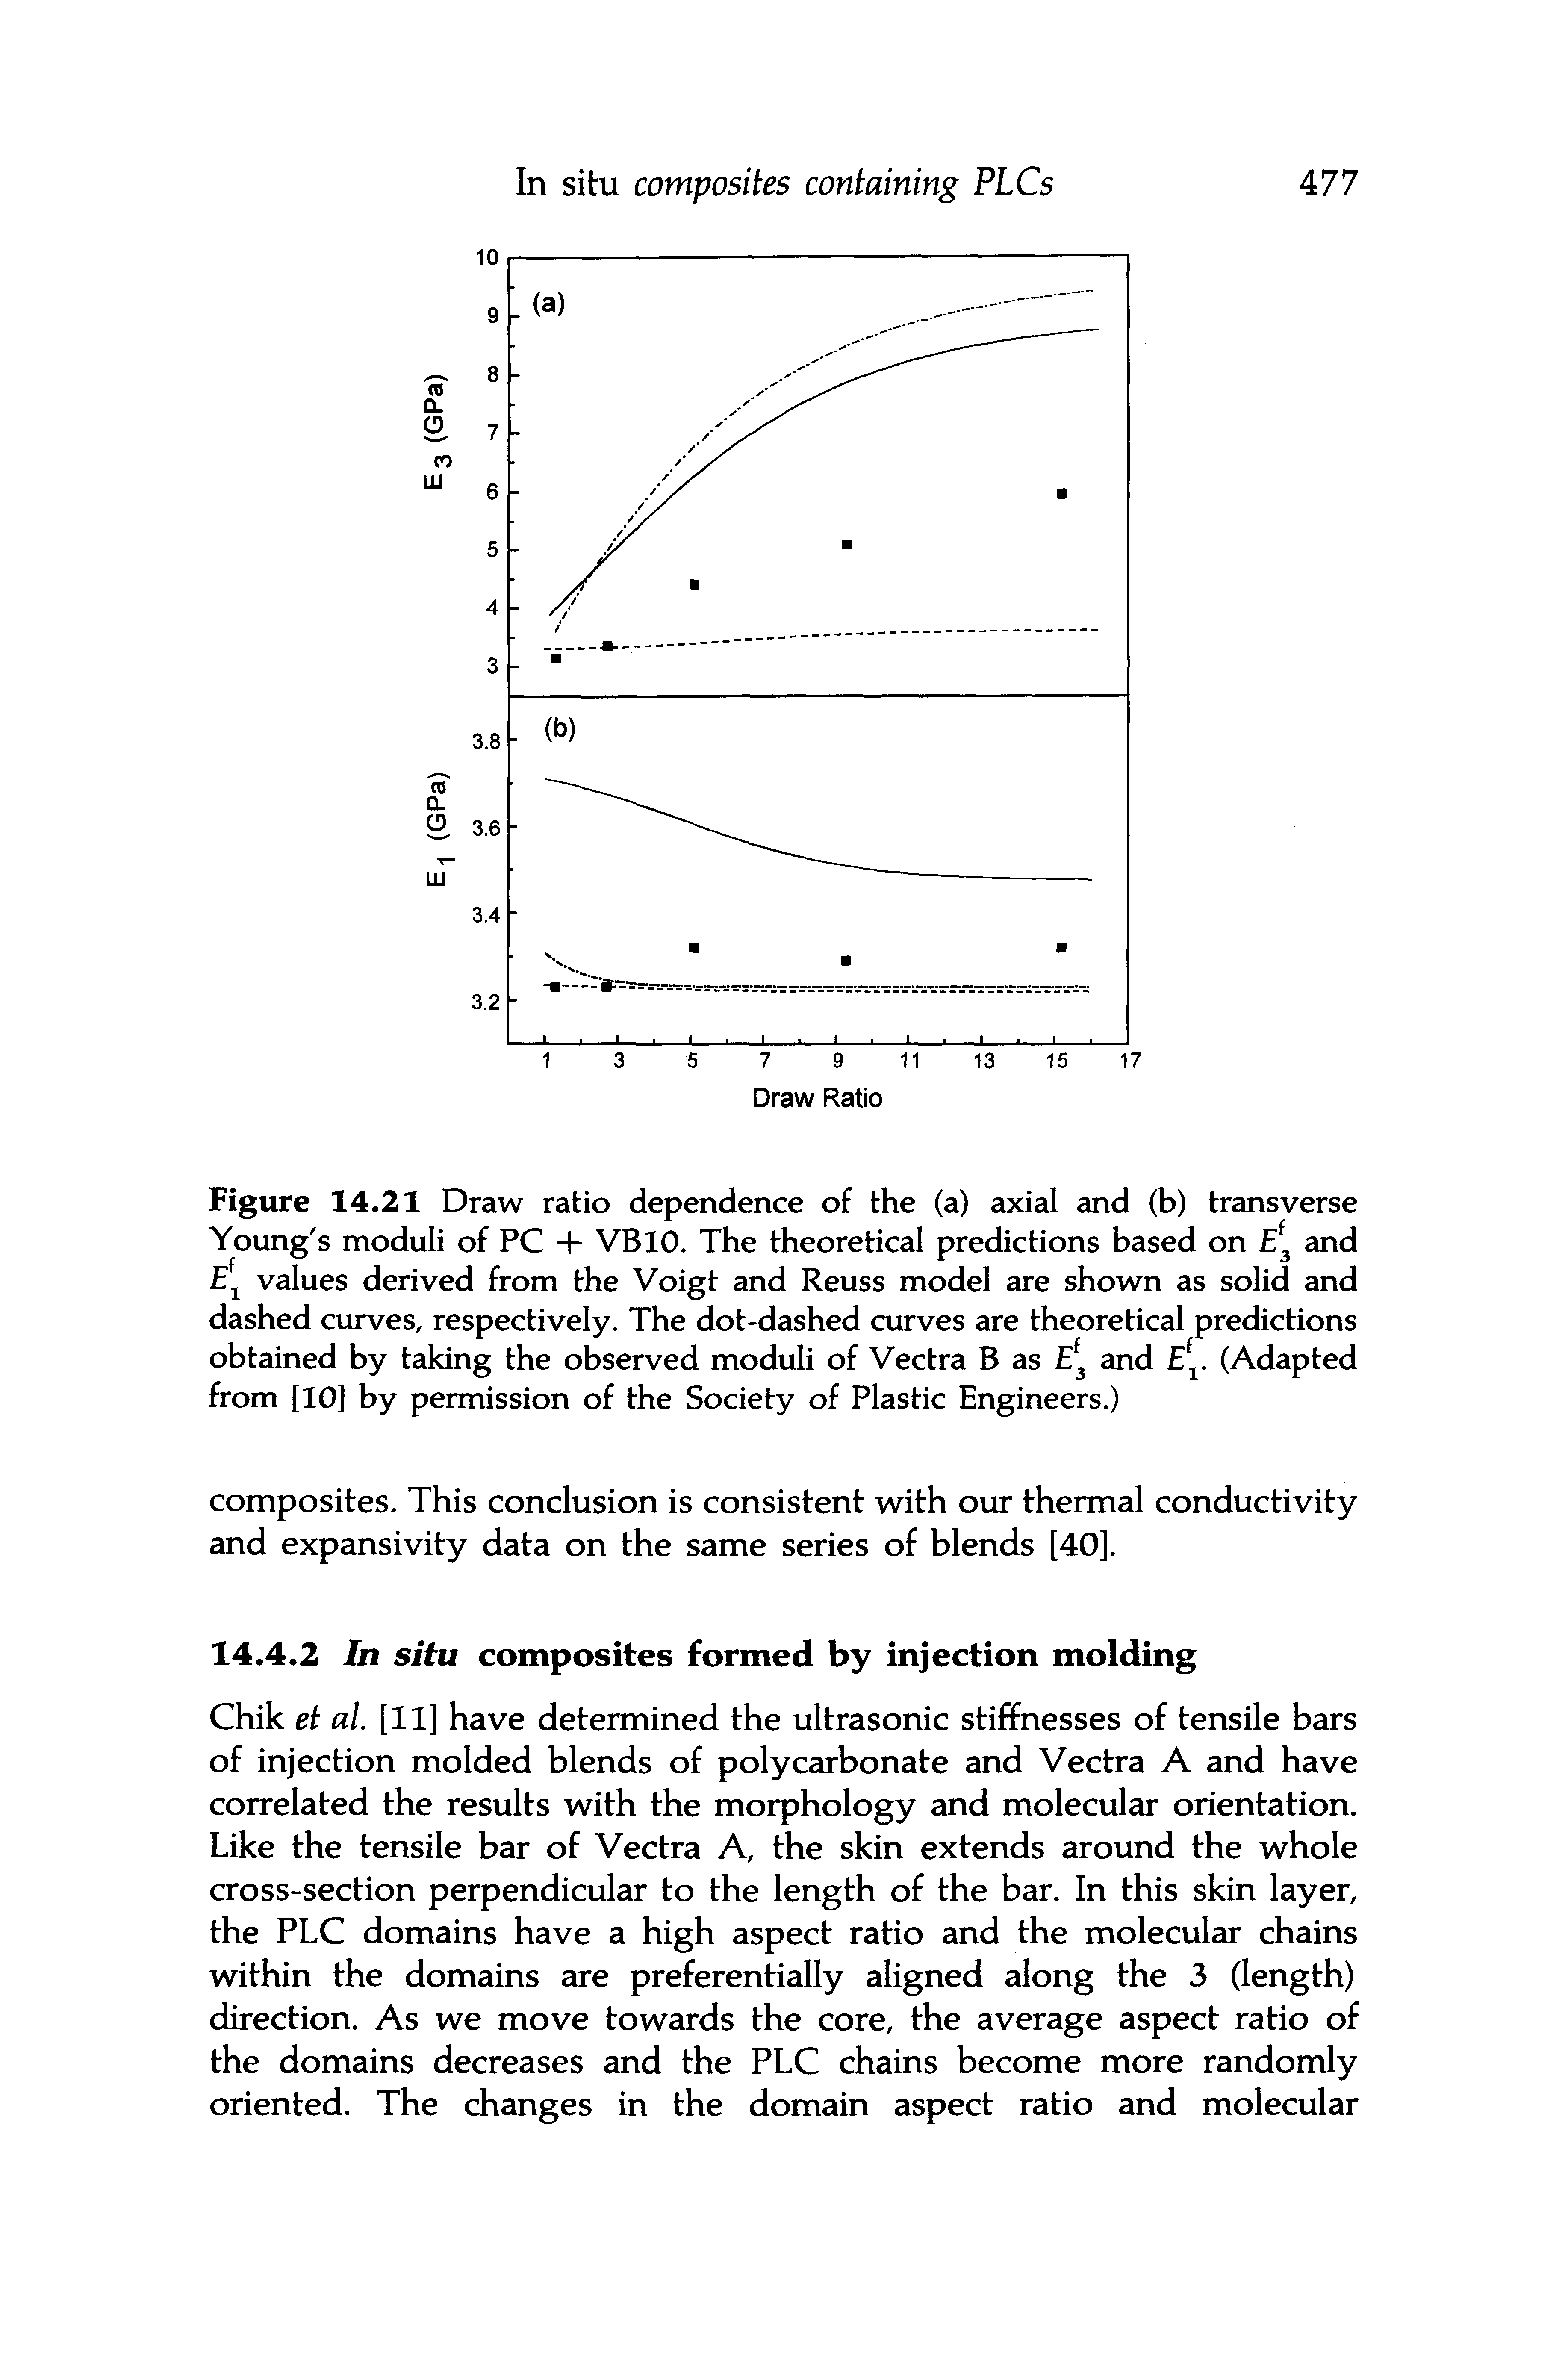 Figure 14.21 Draw ratio dependence of the (a) axial and (b) transverse Young s moduli of PC + VBlO. The theoretical predictions based on 3 and j values derived from the Voigt and Reuss model are shown as solid and dashed curves, respectively. The dot-dashed curves are theoretical predictions obtained by taking the observed moduli of Vectra B as 3 and . (Adapted from [10] by permission of the Society of Plastic Engineers.)...